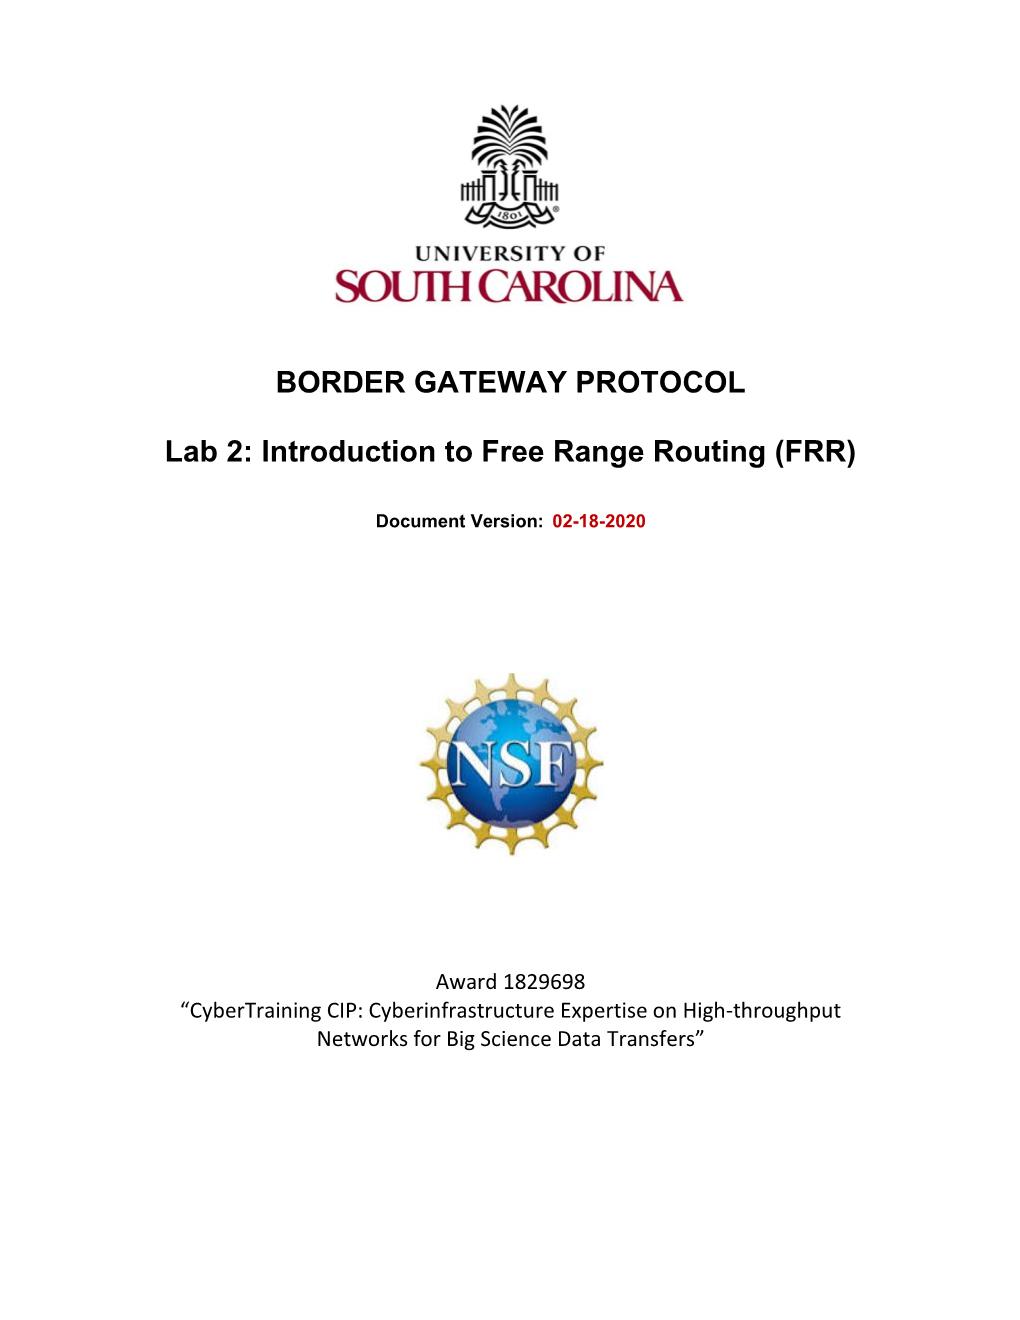 Lab 2: Introduction to Free Range Routing (FRR)